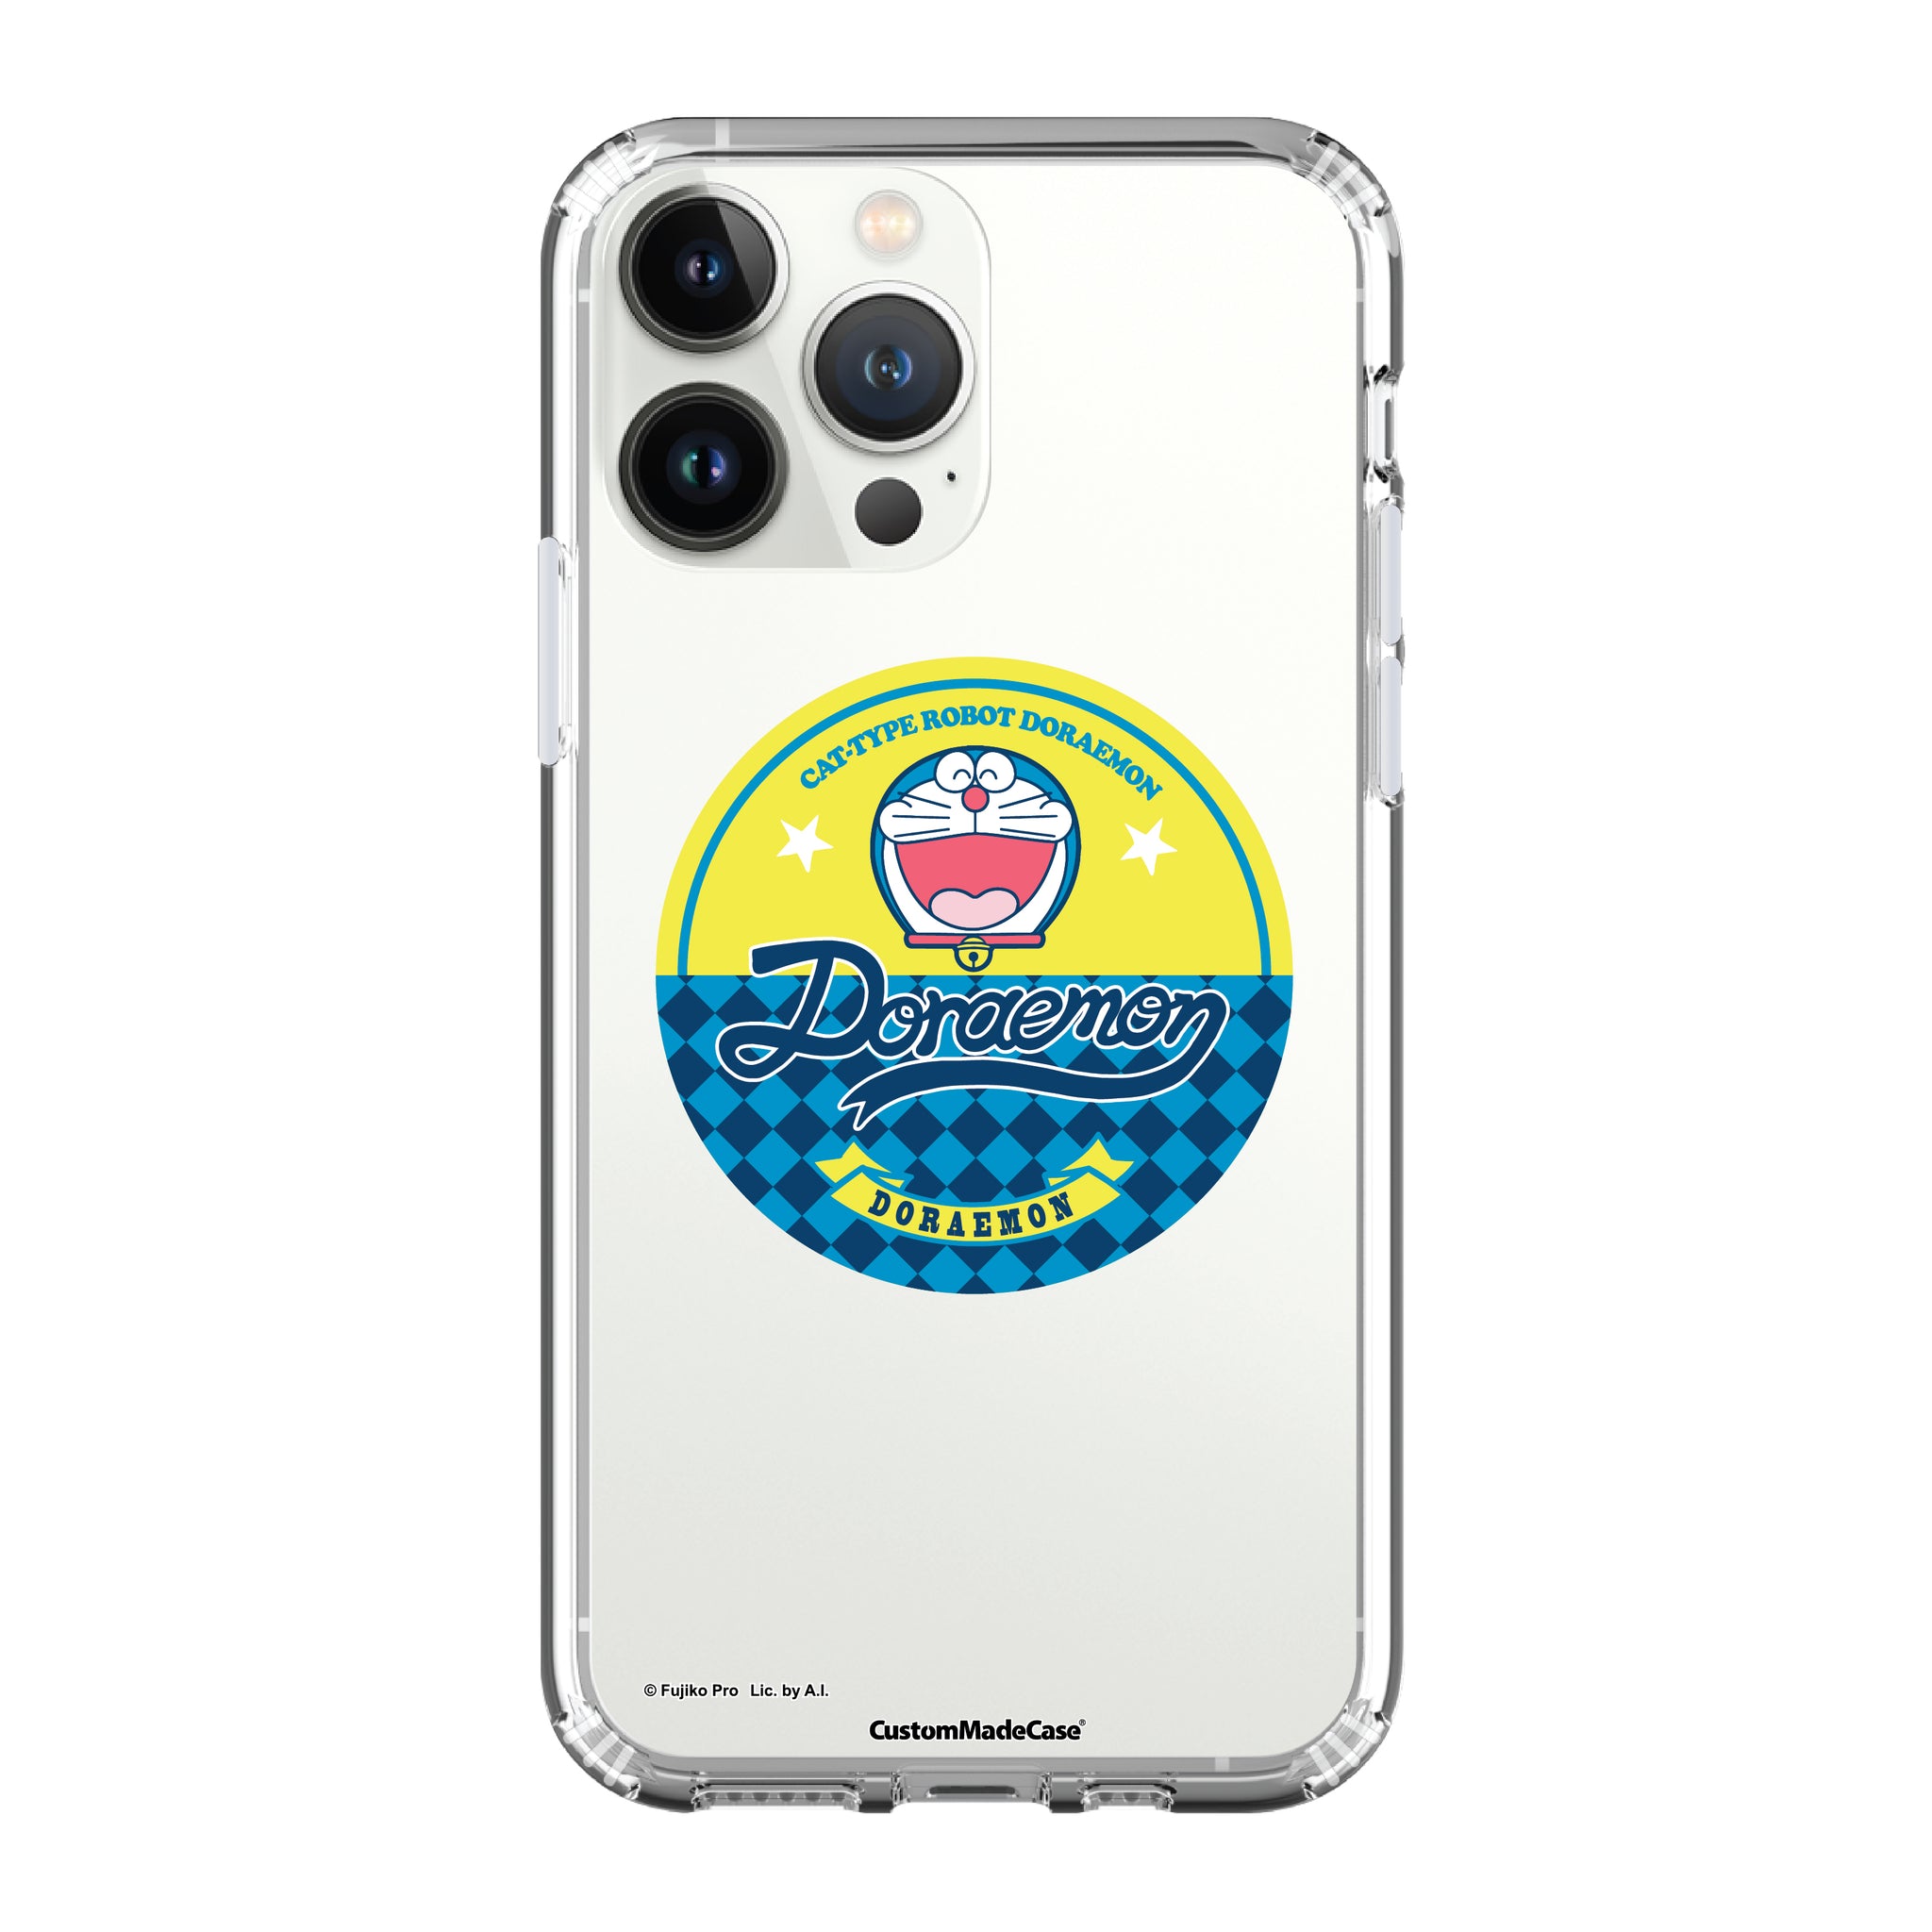 Doraemon Clear Case / iPhone Case / Android Case / Samsung Case 多啦A夢 正版授權 全包邊氣囊防撞手機殼  (DO110)